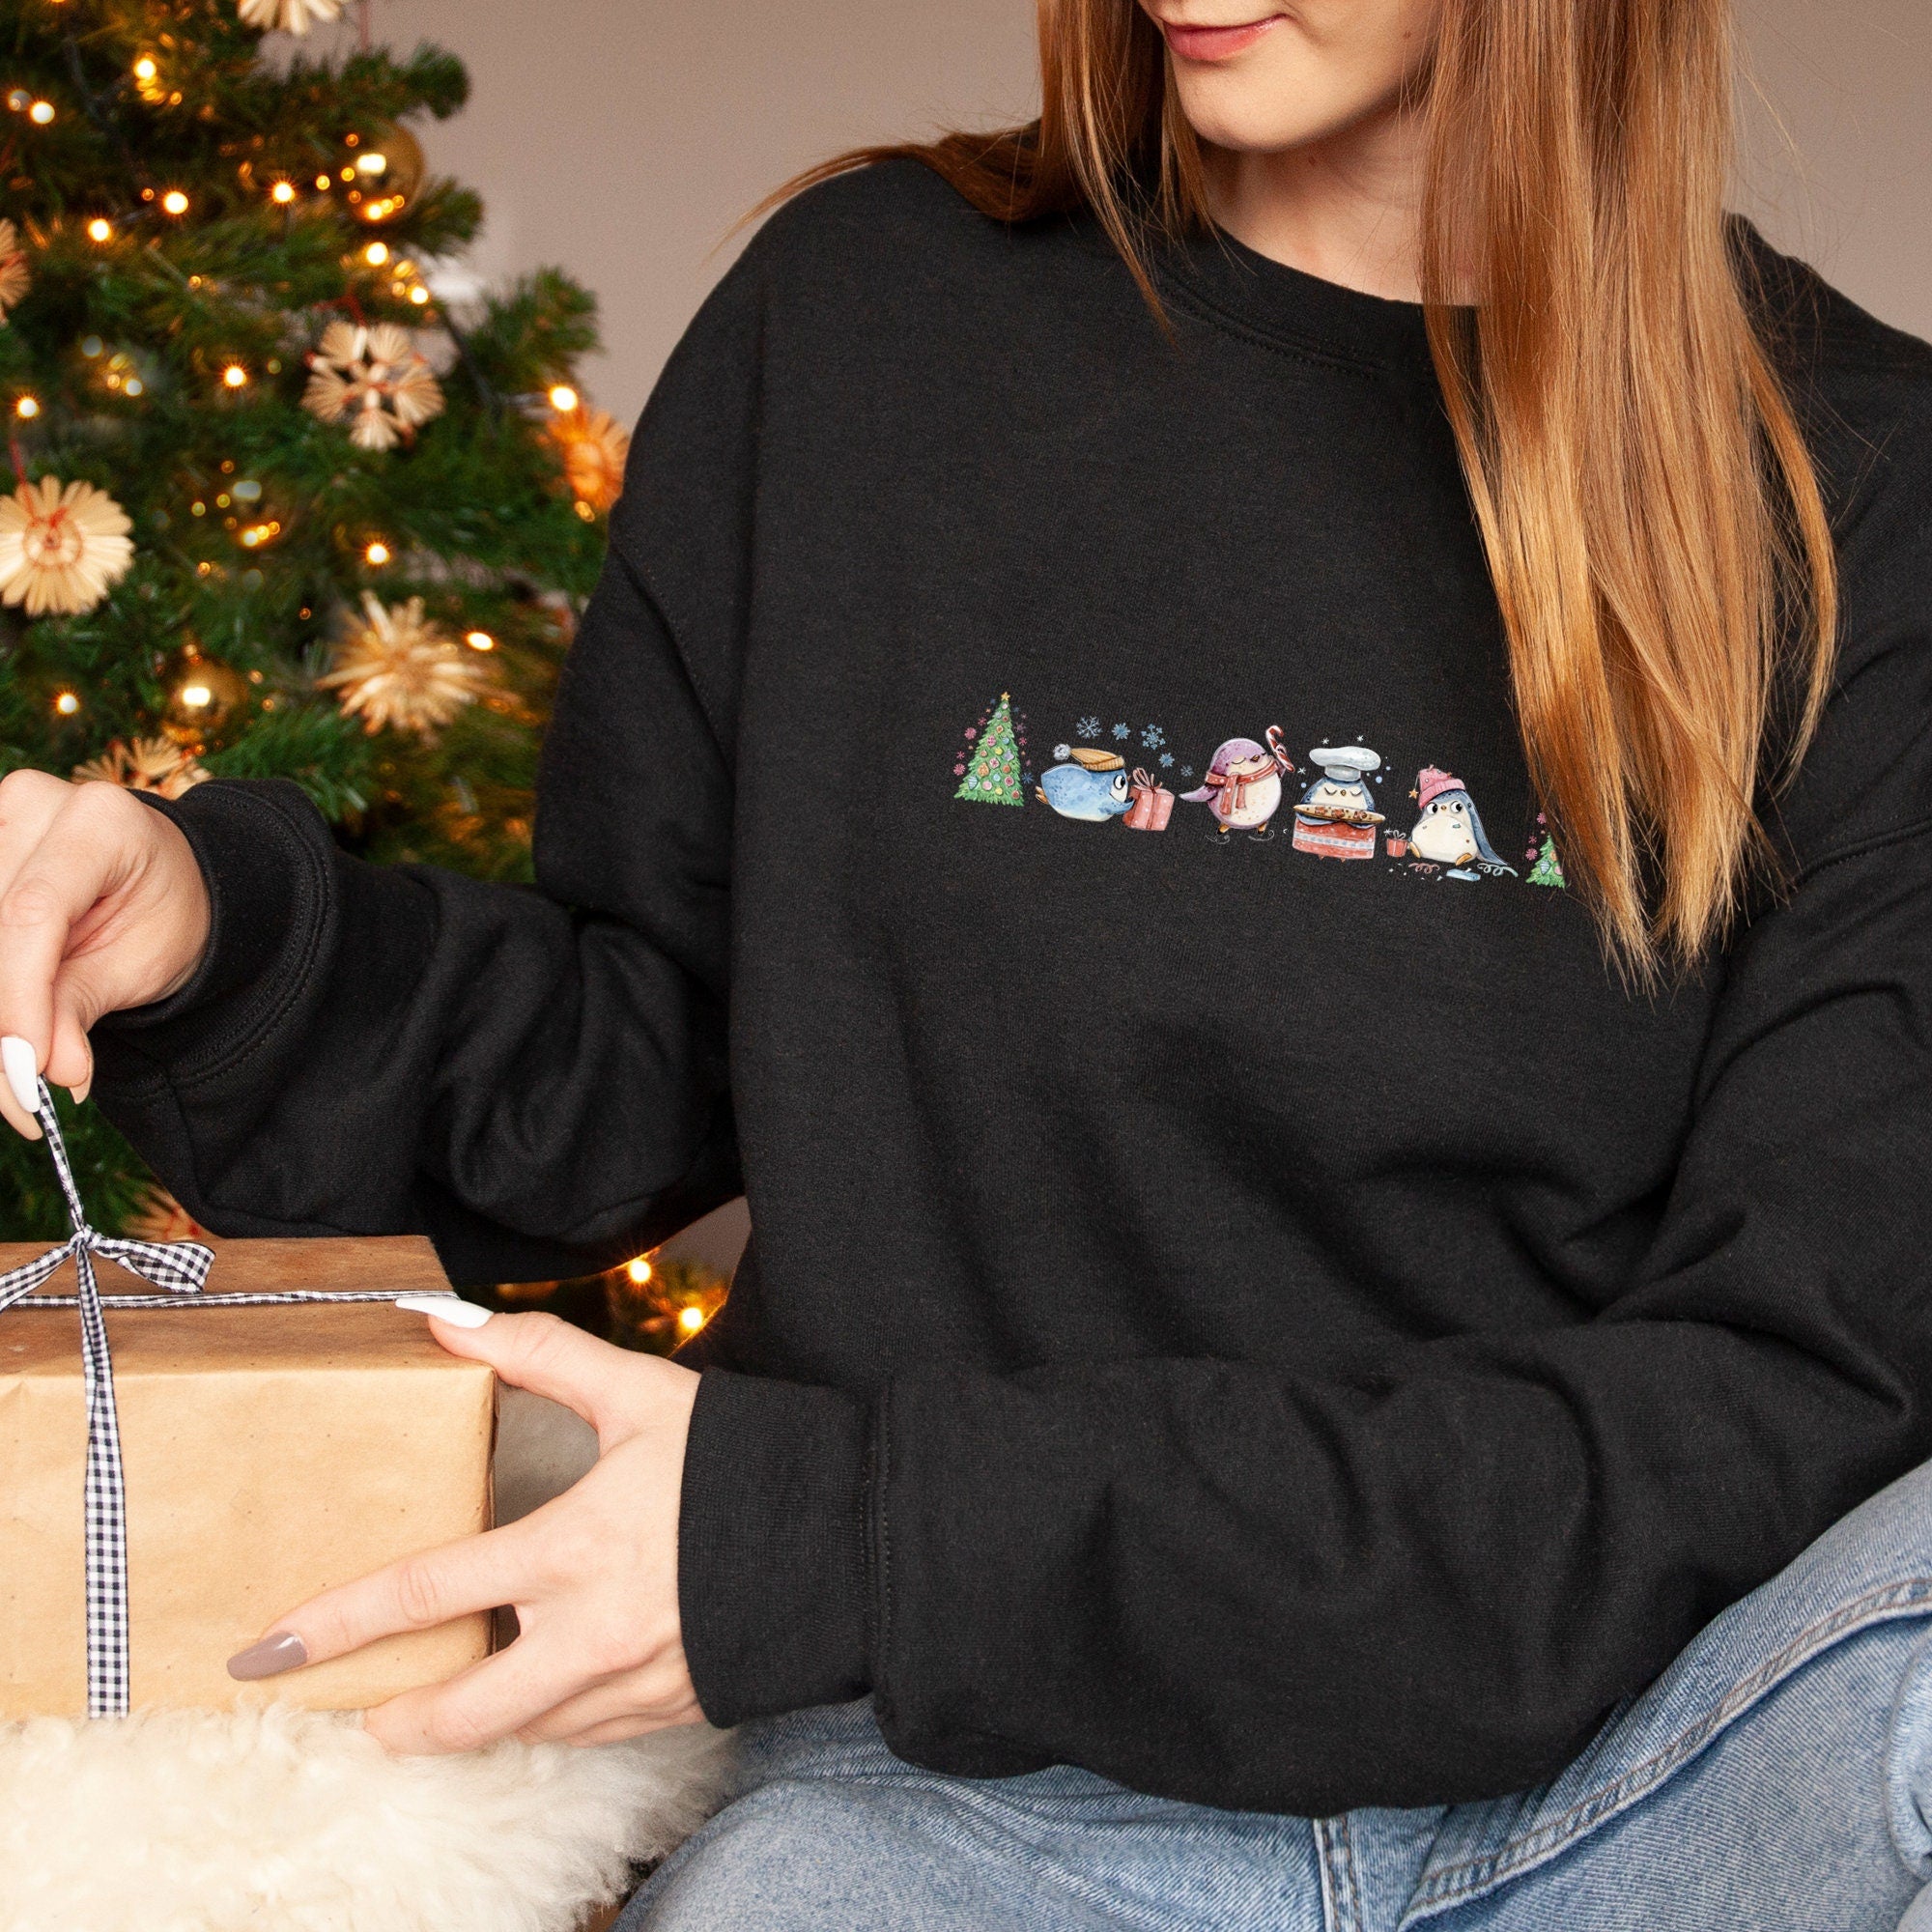 Little Penguins And Tree Christmas Jumper,Xmas Sweatshirt, Cosy Christmas Jumper For Women